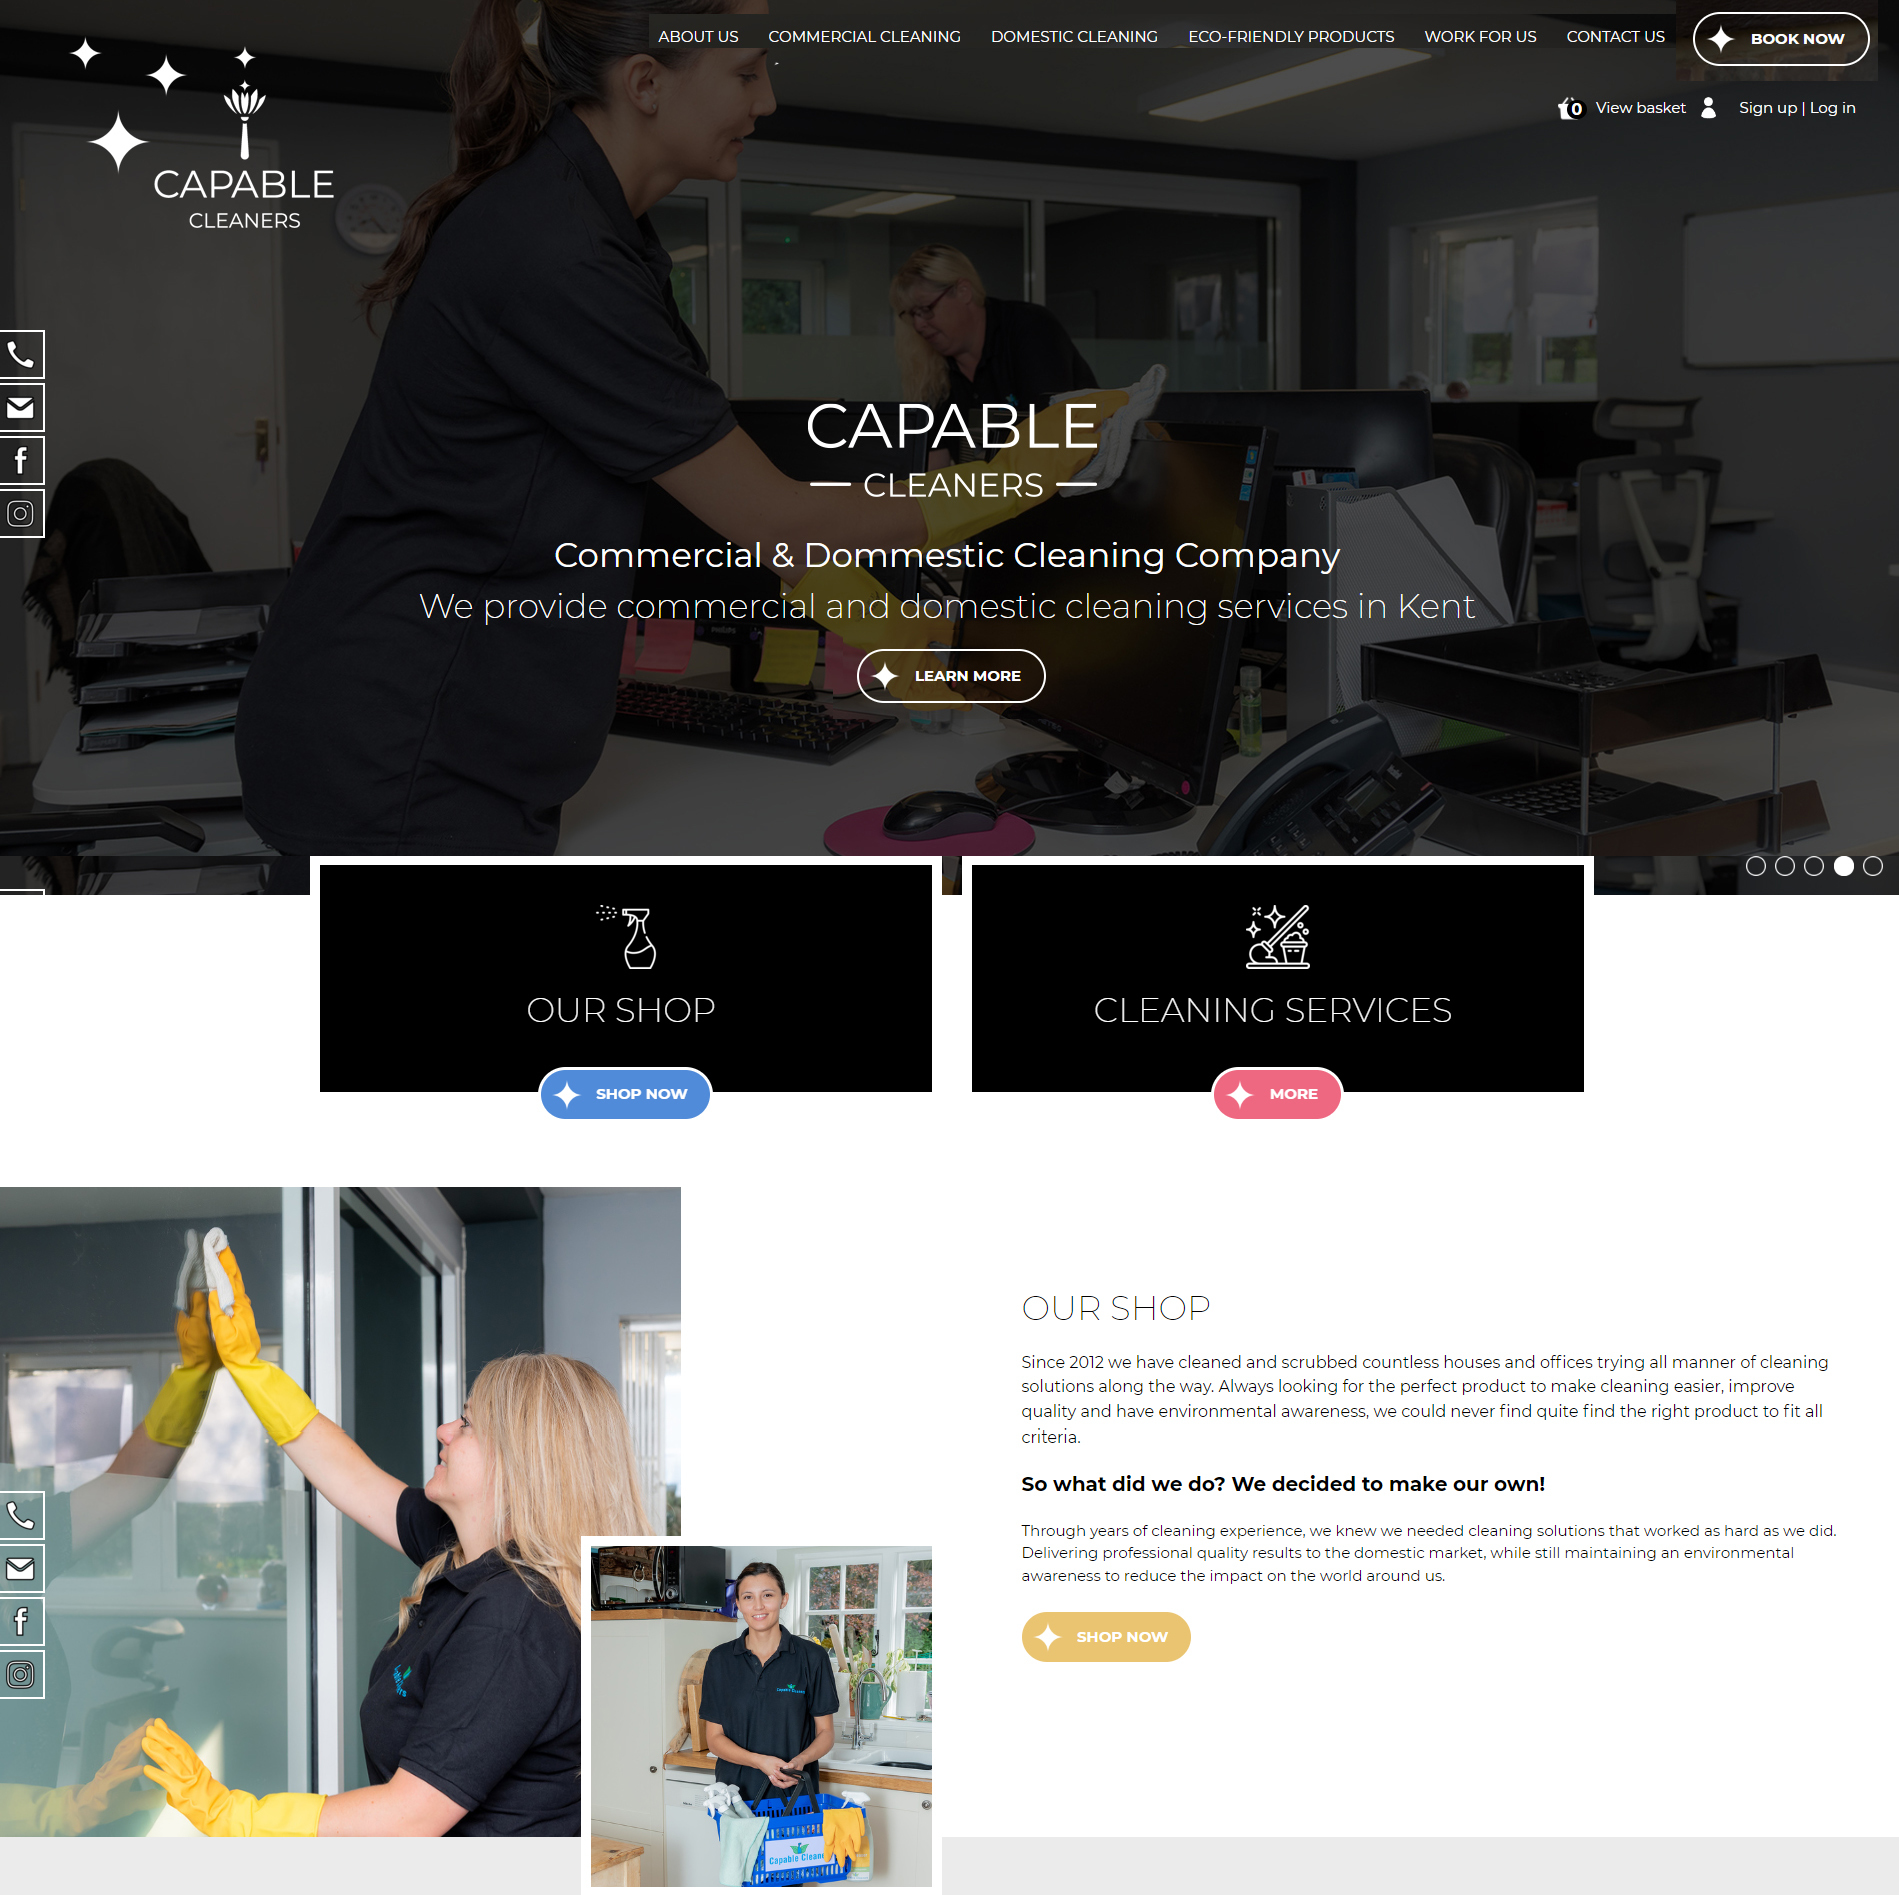 Website image of Capable Cleaners Cleaning Company in Kent, an Itseeze Gravesend Website Customer